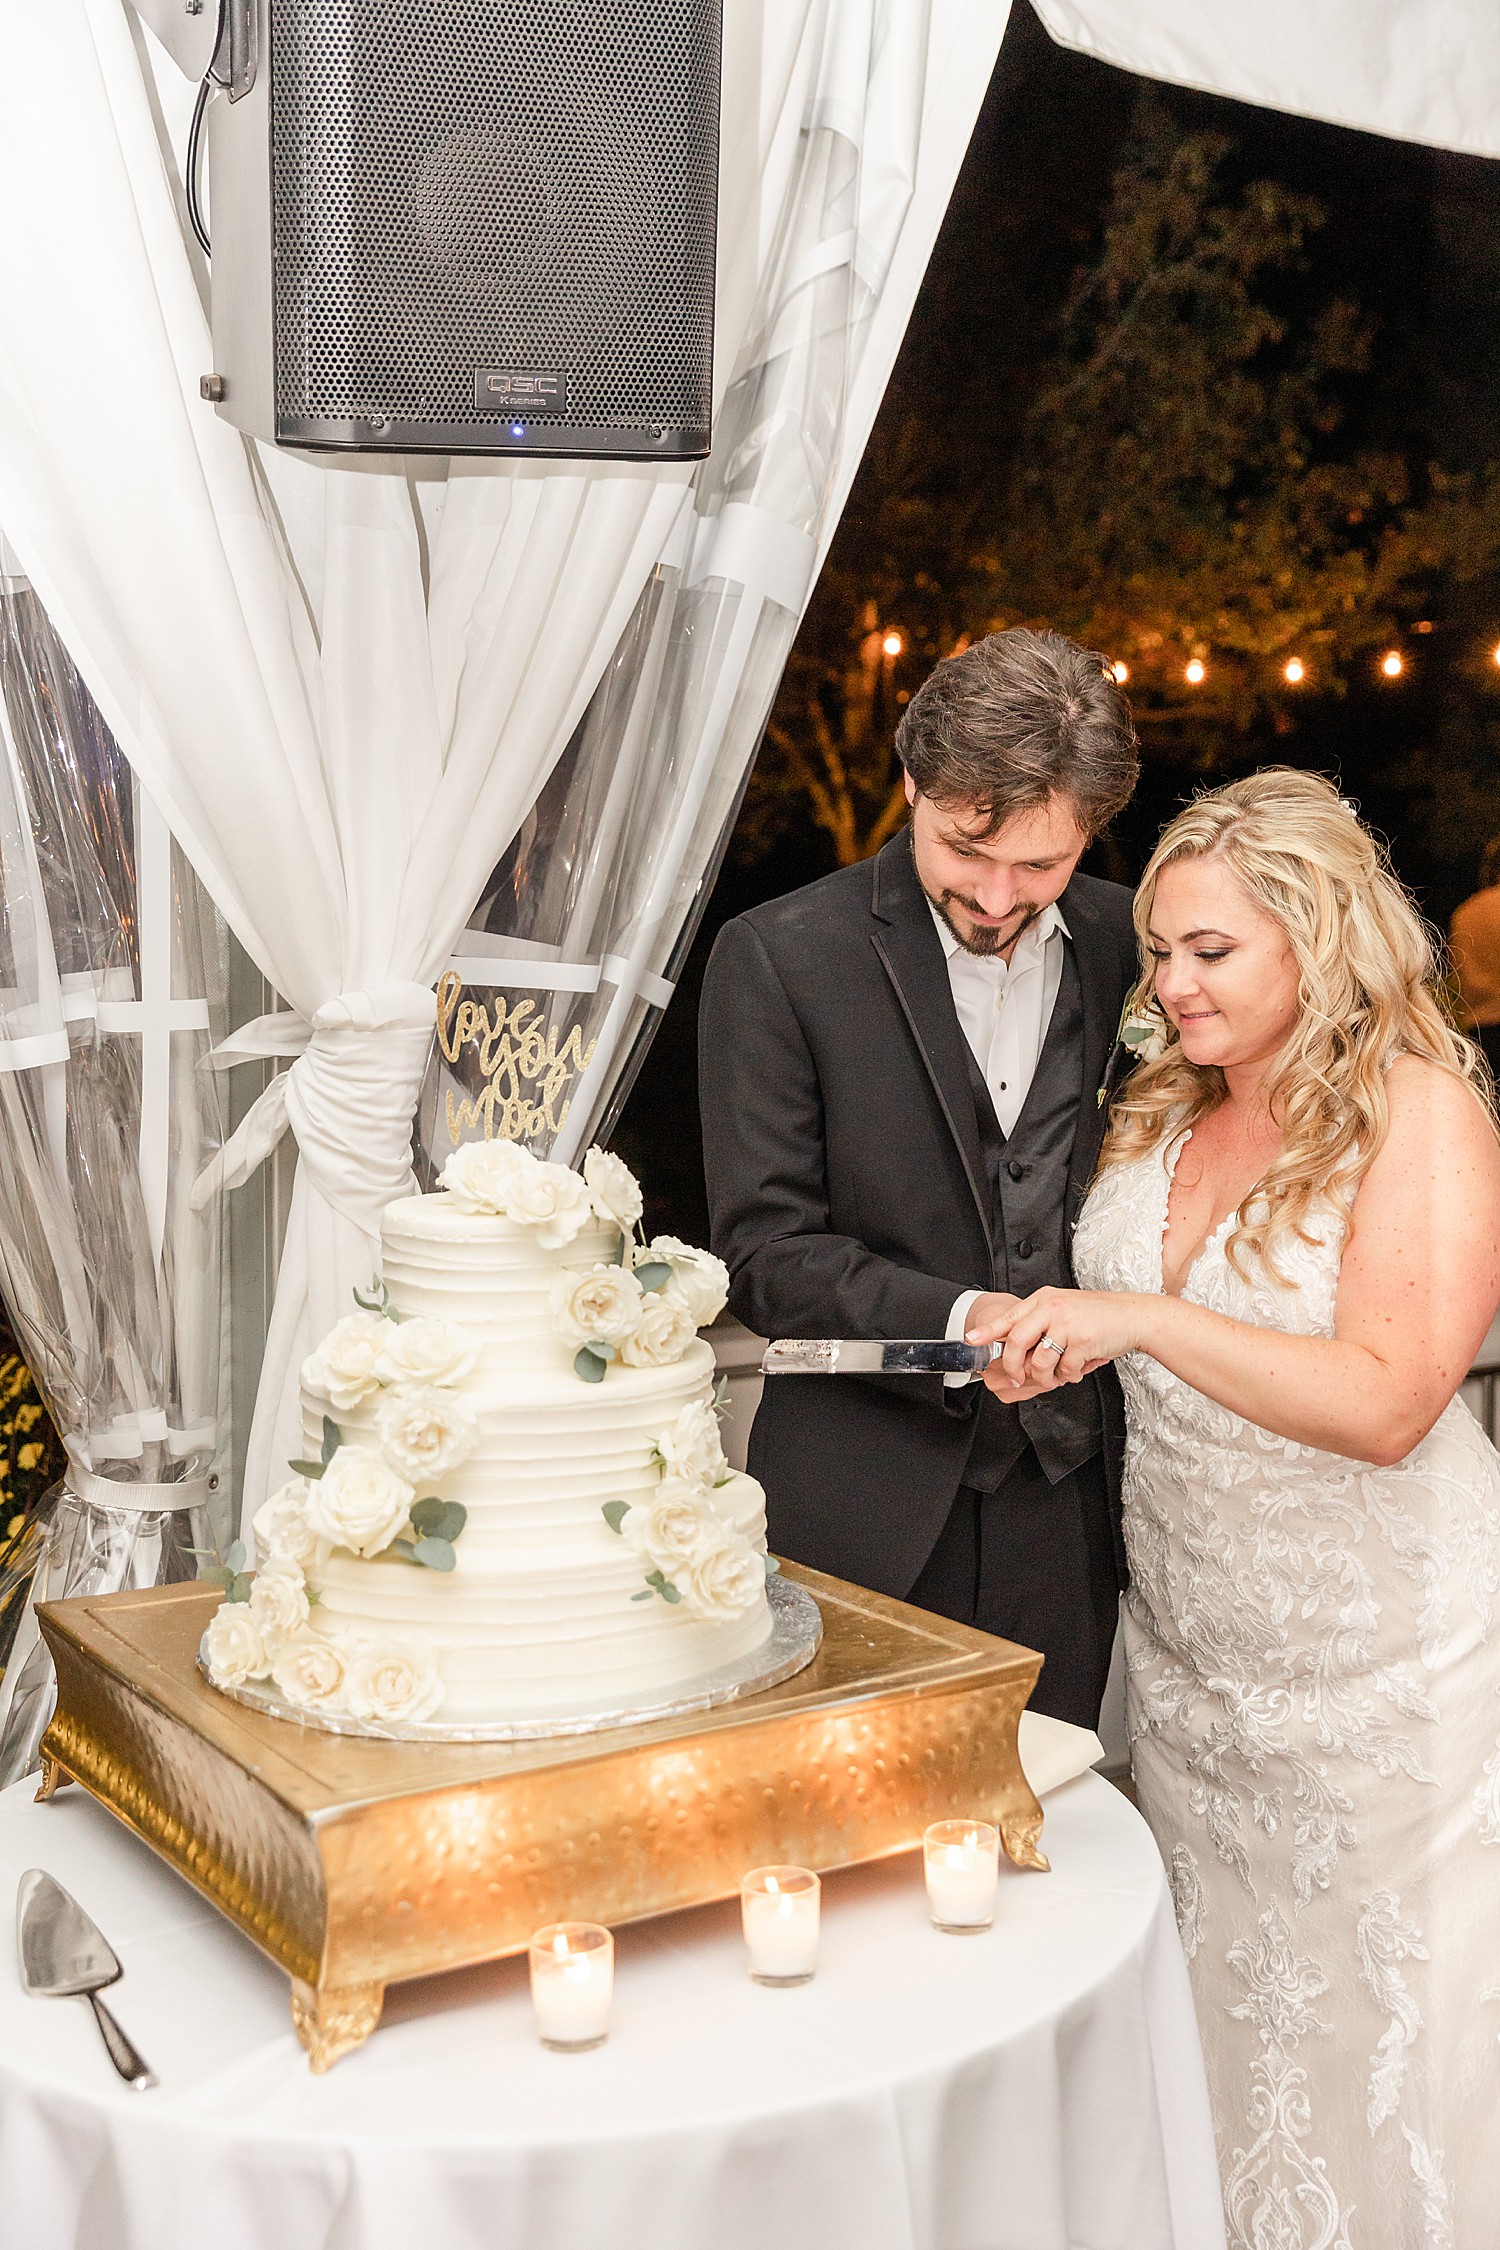 couple cutting their 3 tiered wedding cake